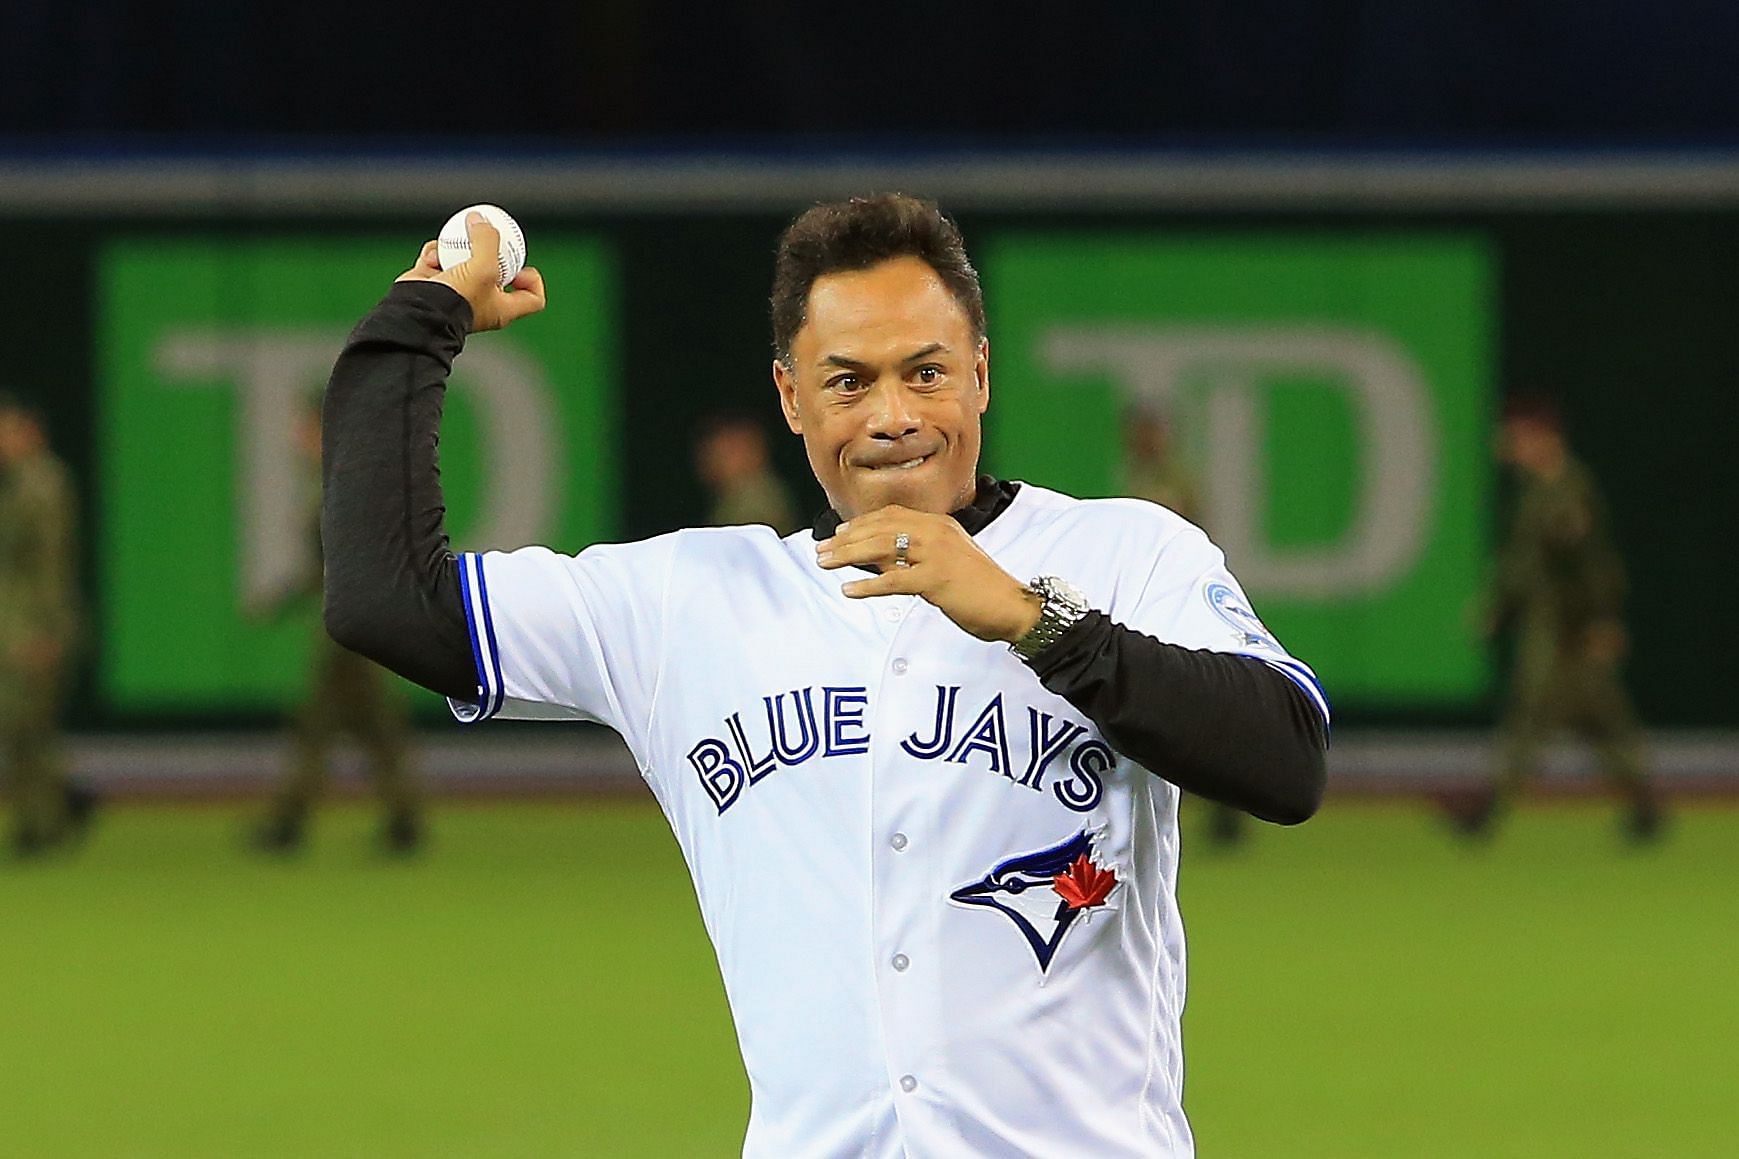 Wild Card Game - Baltimore Orioles v Toronto Blue Jays TORONTO, ON - OCTOBER 04: Former Major League Baseball player Roberto Alomar throws out the ceremonial first pitch prior to the American League Wild Card game between the Toronto Blue Jays and the Baltimore Orioles at Rogers Centre on October 4, 2016 in Toronto, Canada. (Photo by Vaughn Ridley/Getty Images)